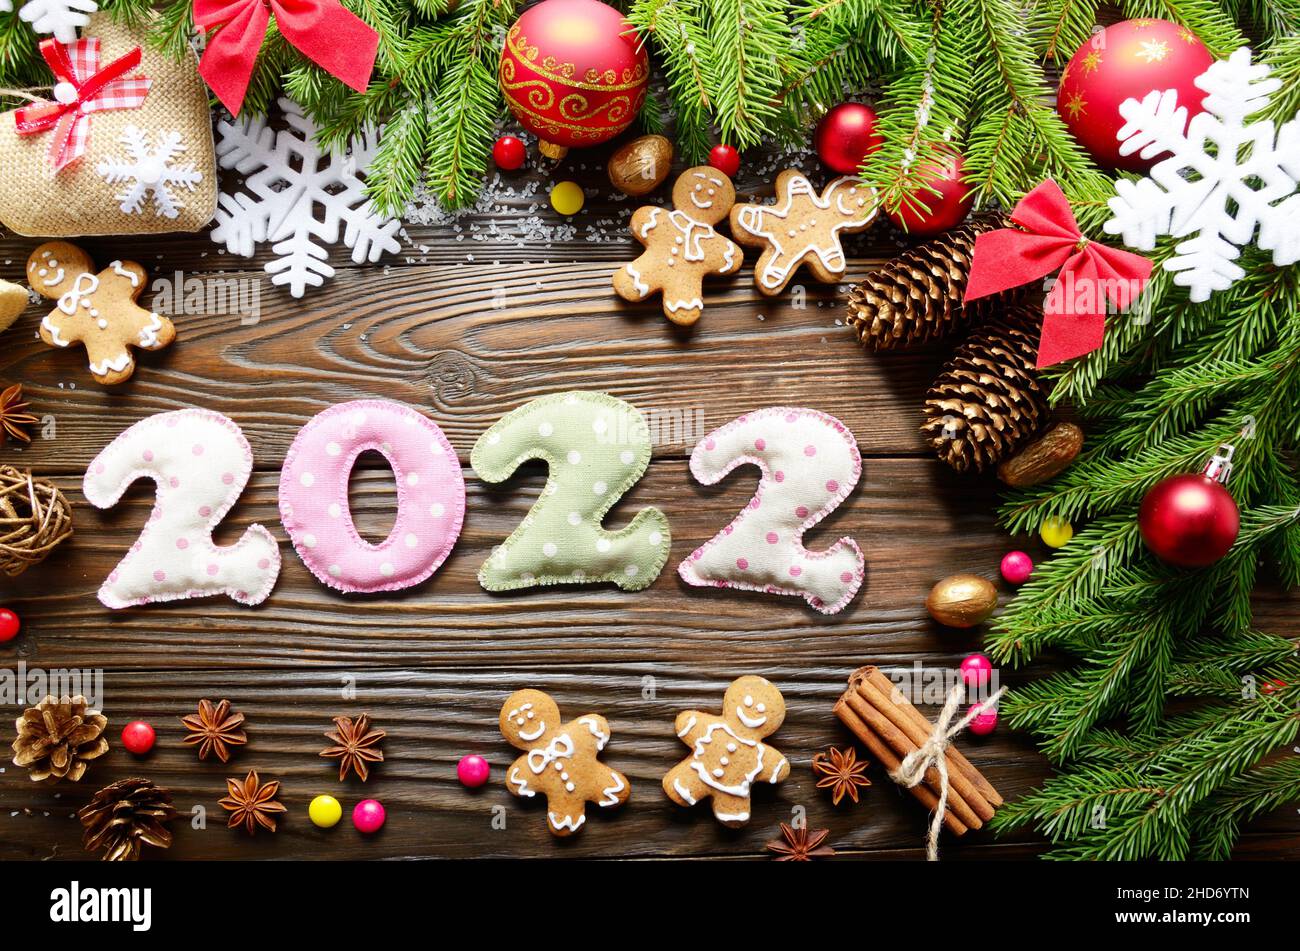 Colorful stitched digits 2022 of polkadot fabric with Christmas ...